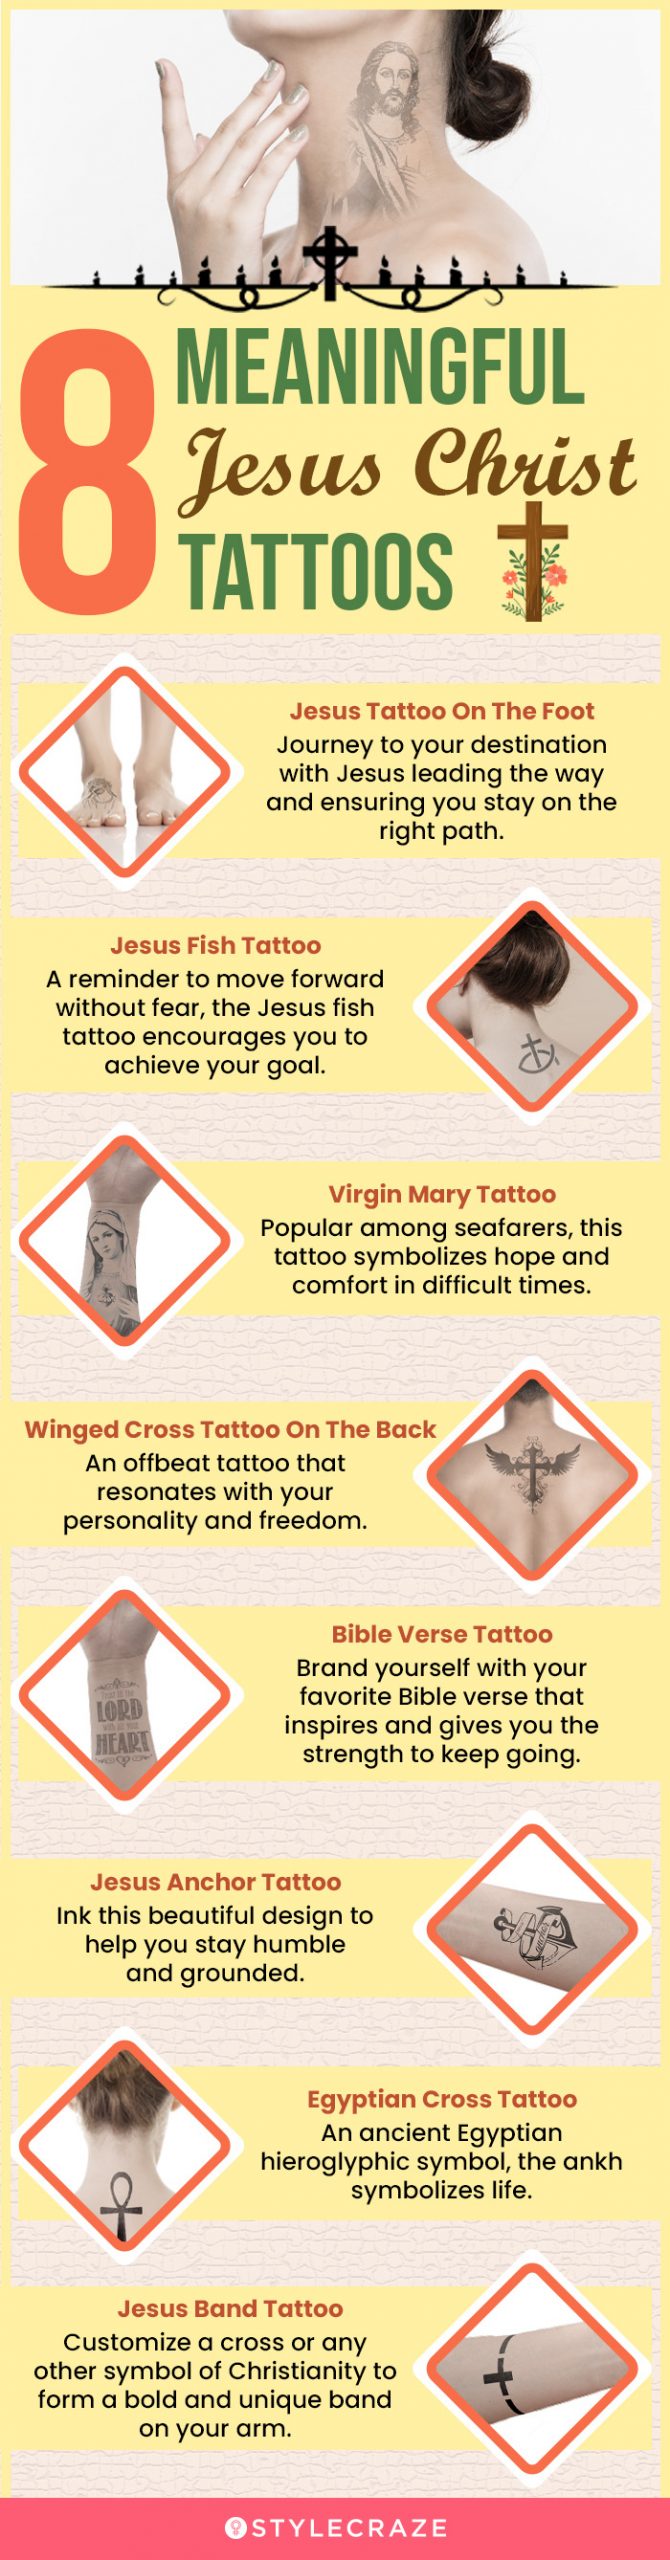 8 meaningful jesus christ tattoos [infographic]